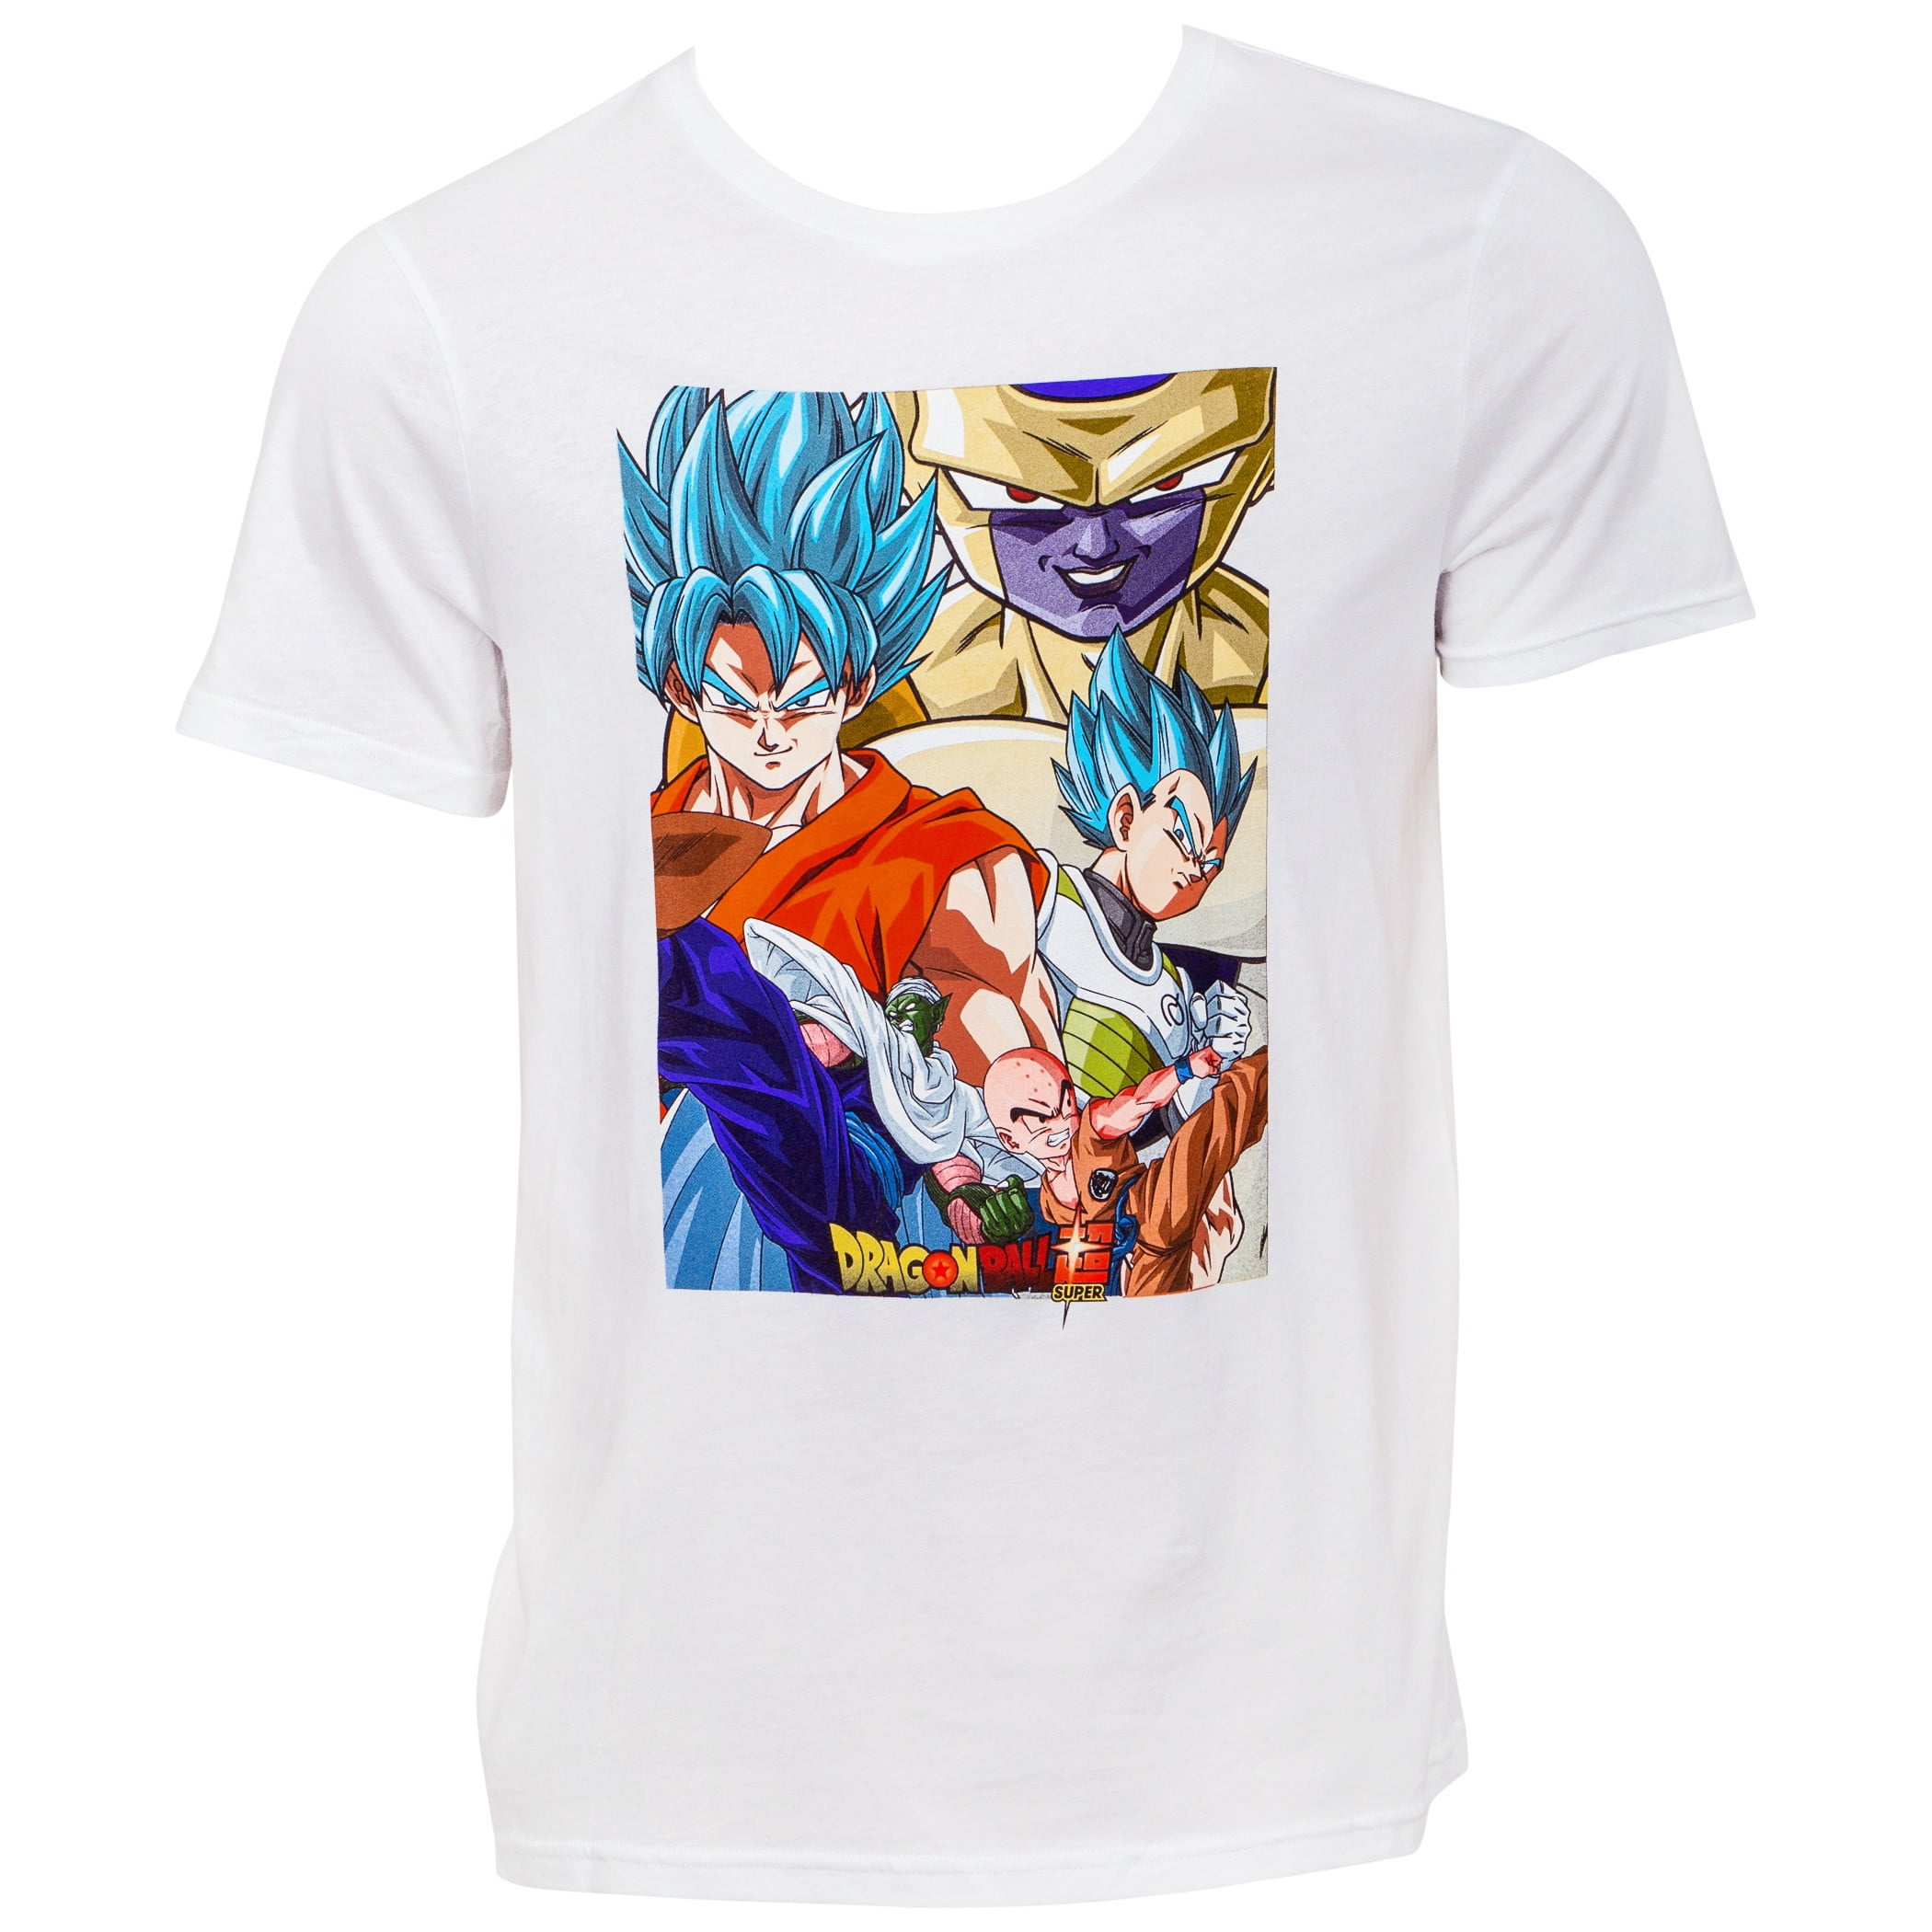 Choose image and size iron on T shirt transfer Dragon Ball characters 